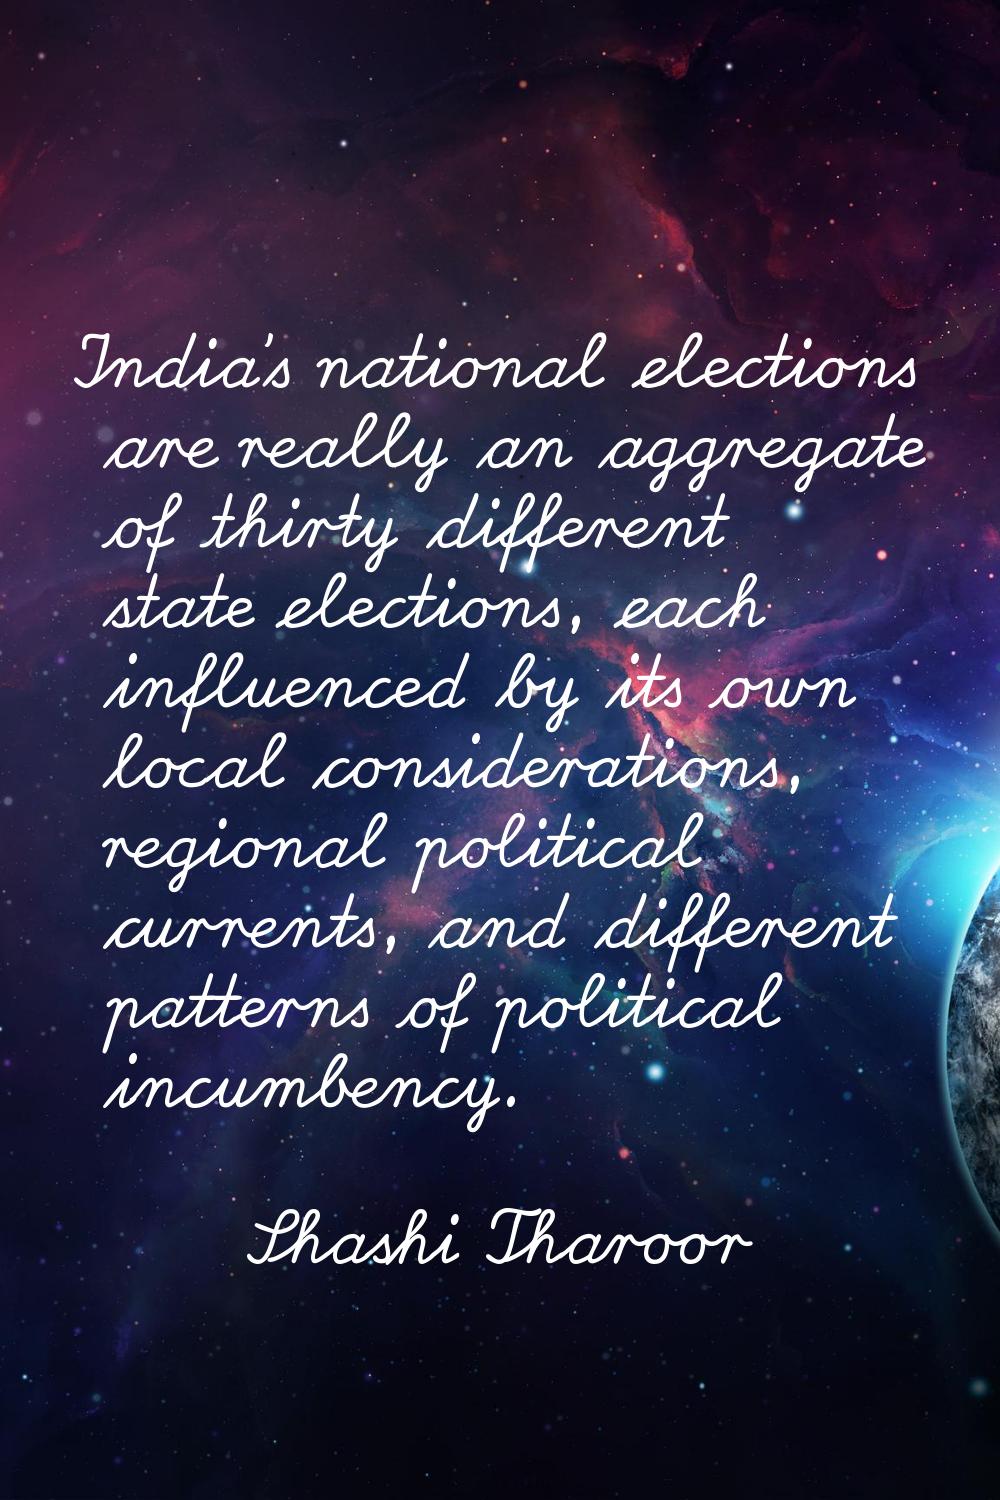 India's national elections are really an aggregate of thirty different state elections, each influe